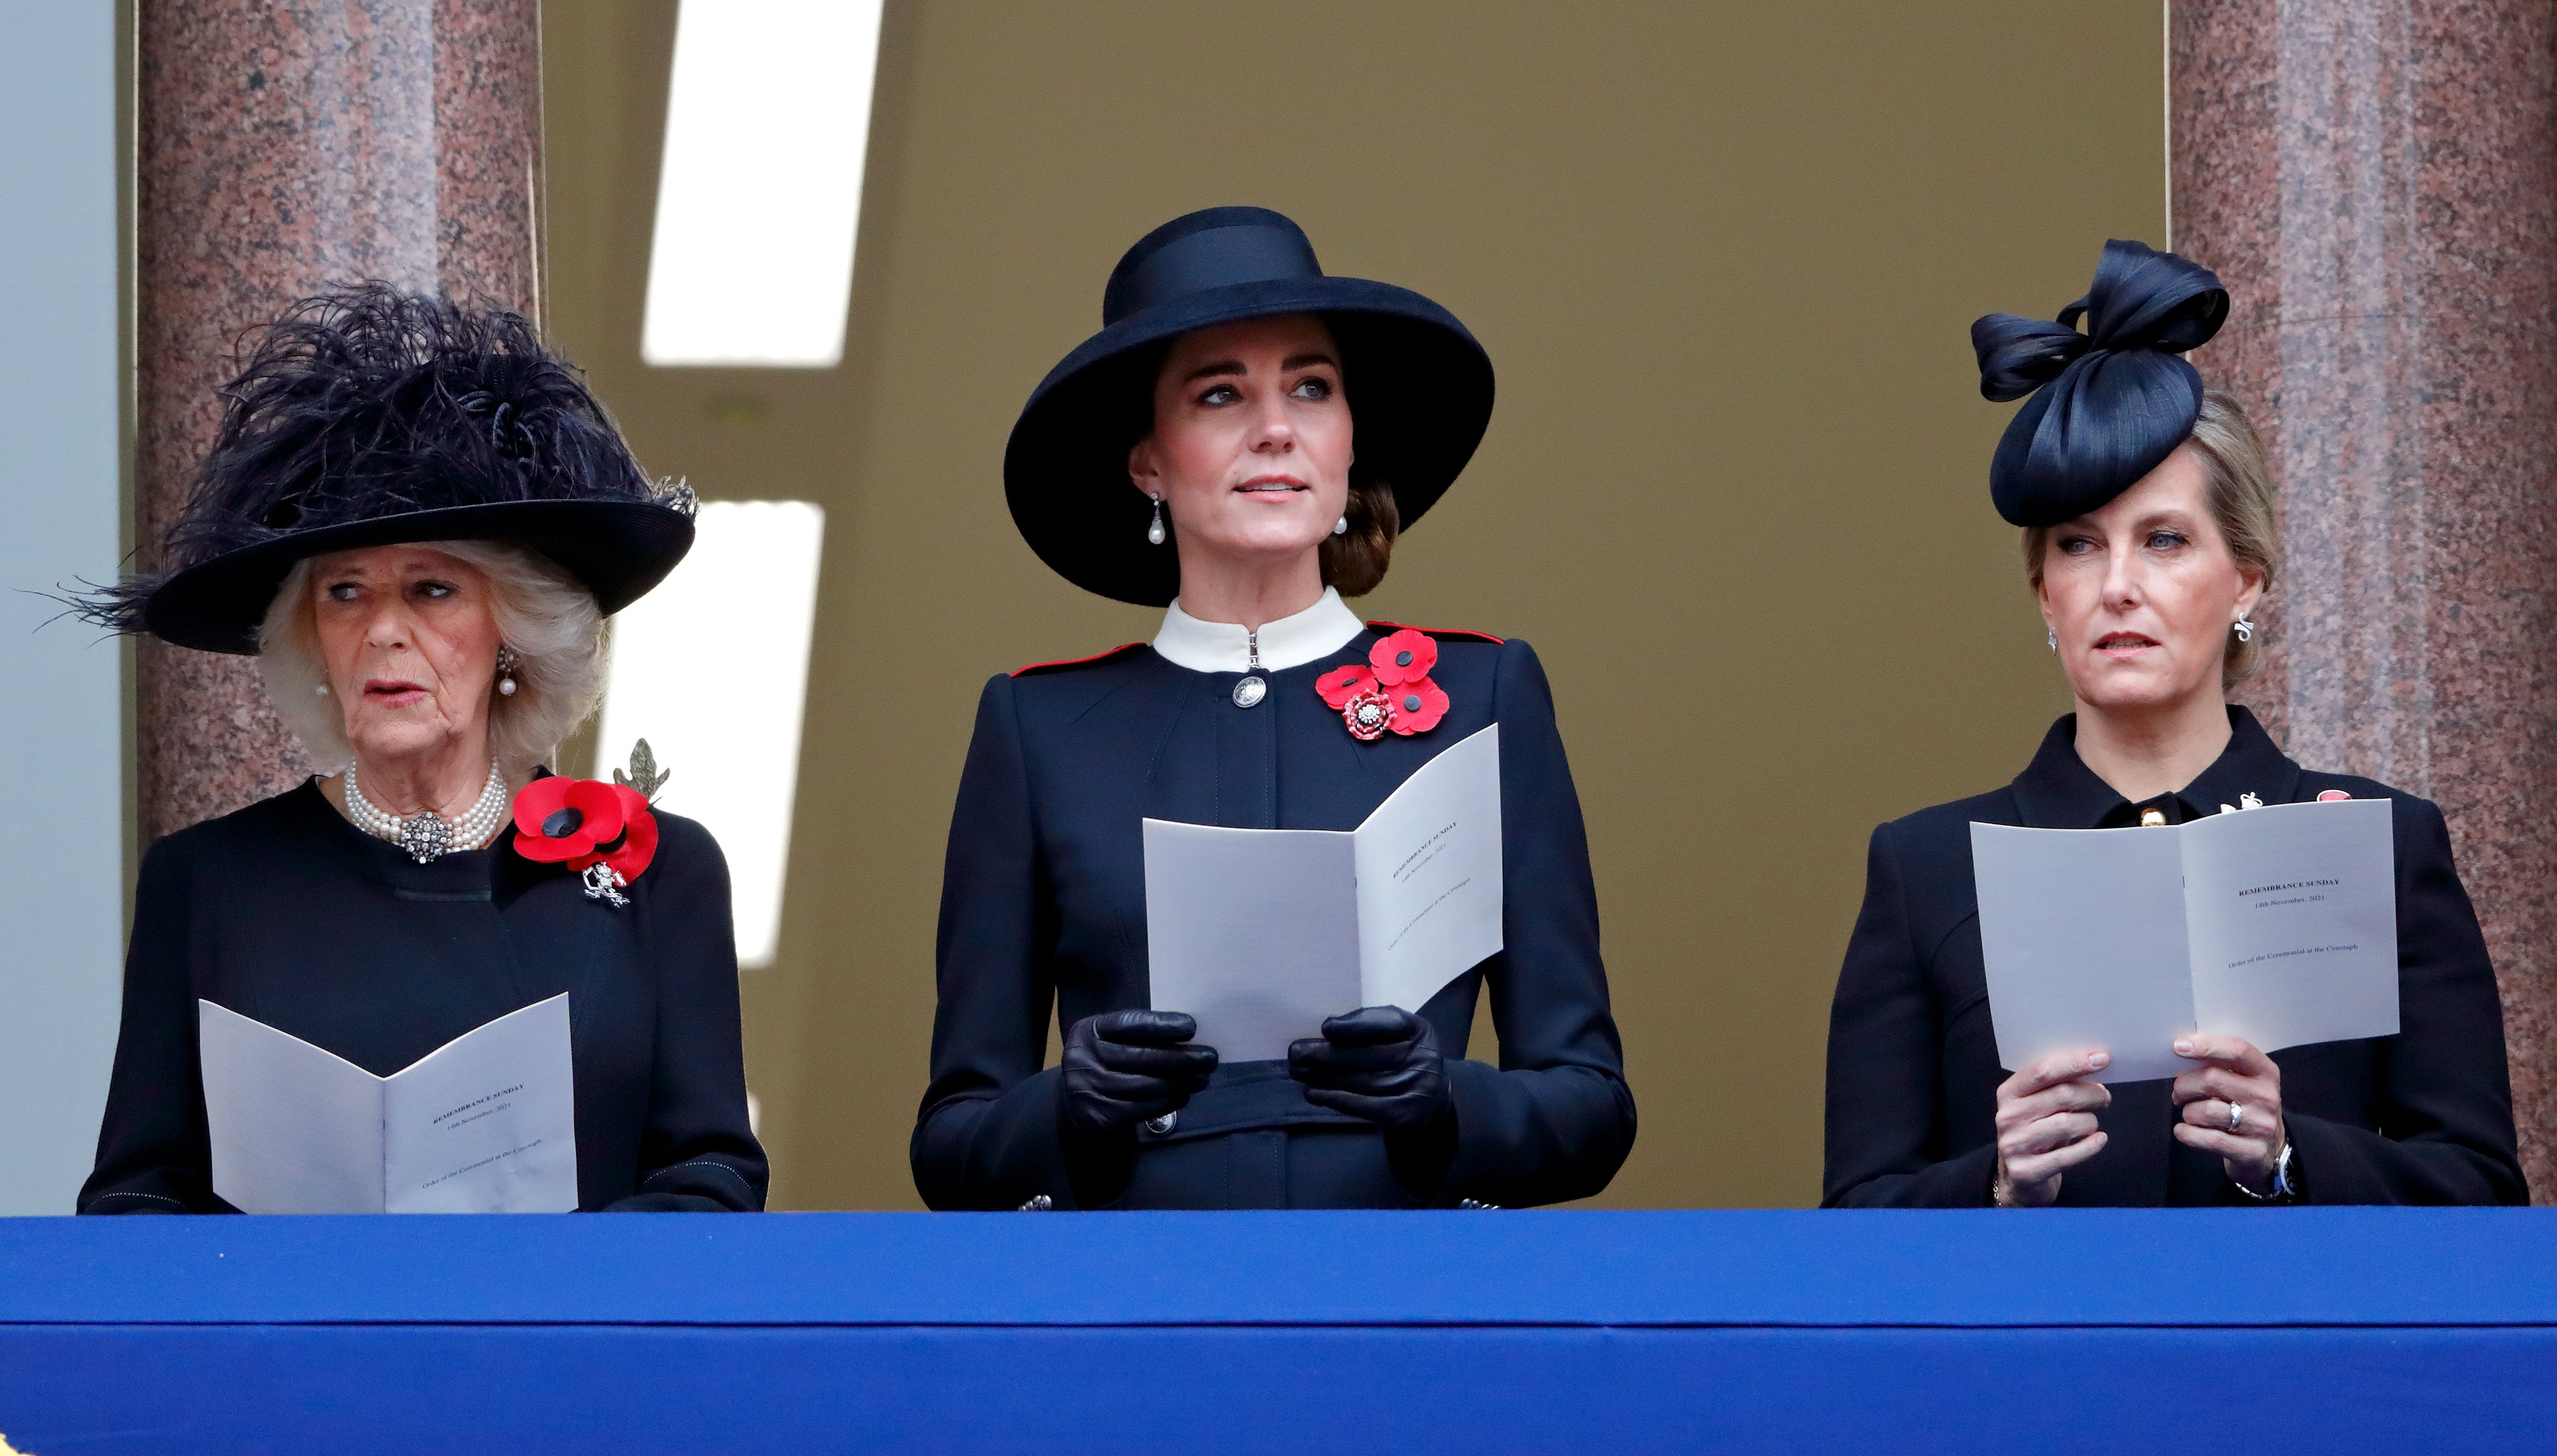 Camilla, Duchess of Cornwall Kate Middleton, and Sophie Countess of Wessex during the annual Remembrance Sunday service at The Cenotaph on November 14, 2021 in London, England. / Source: Getty Images